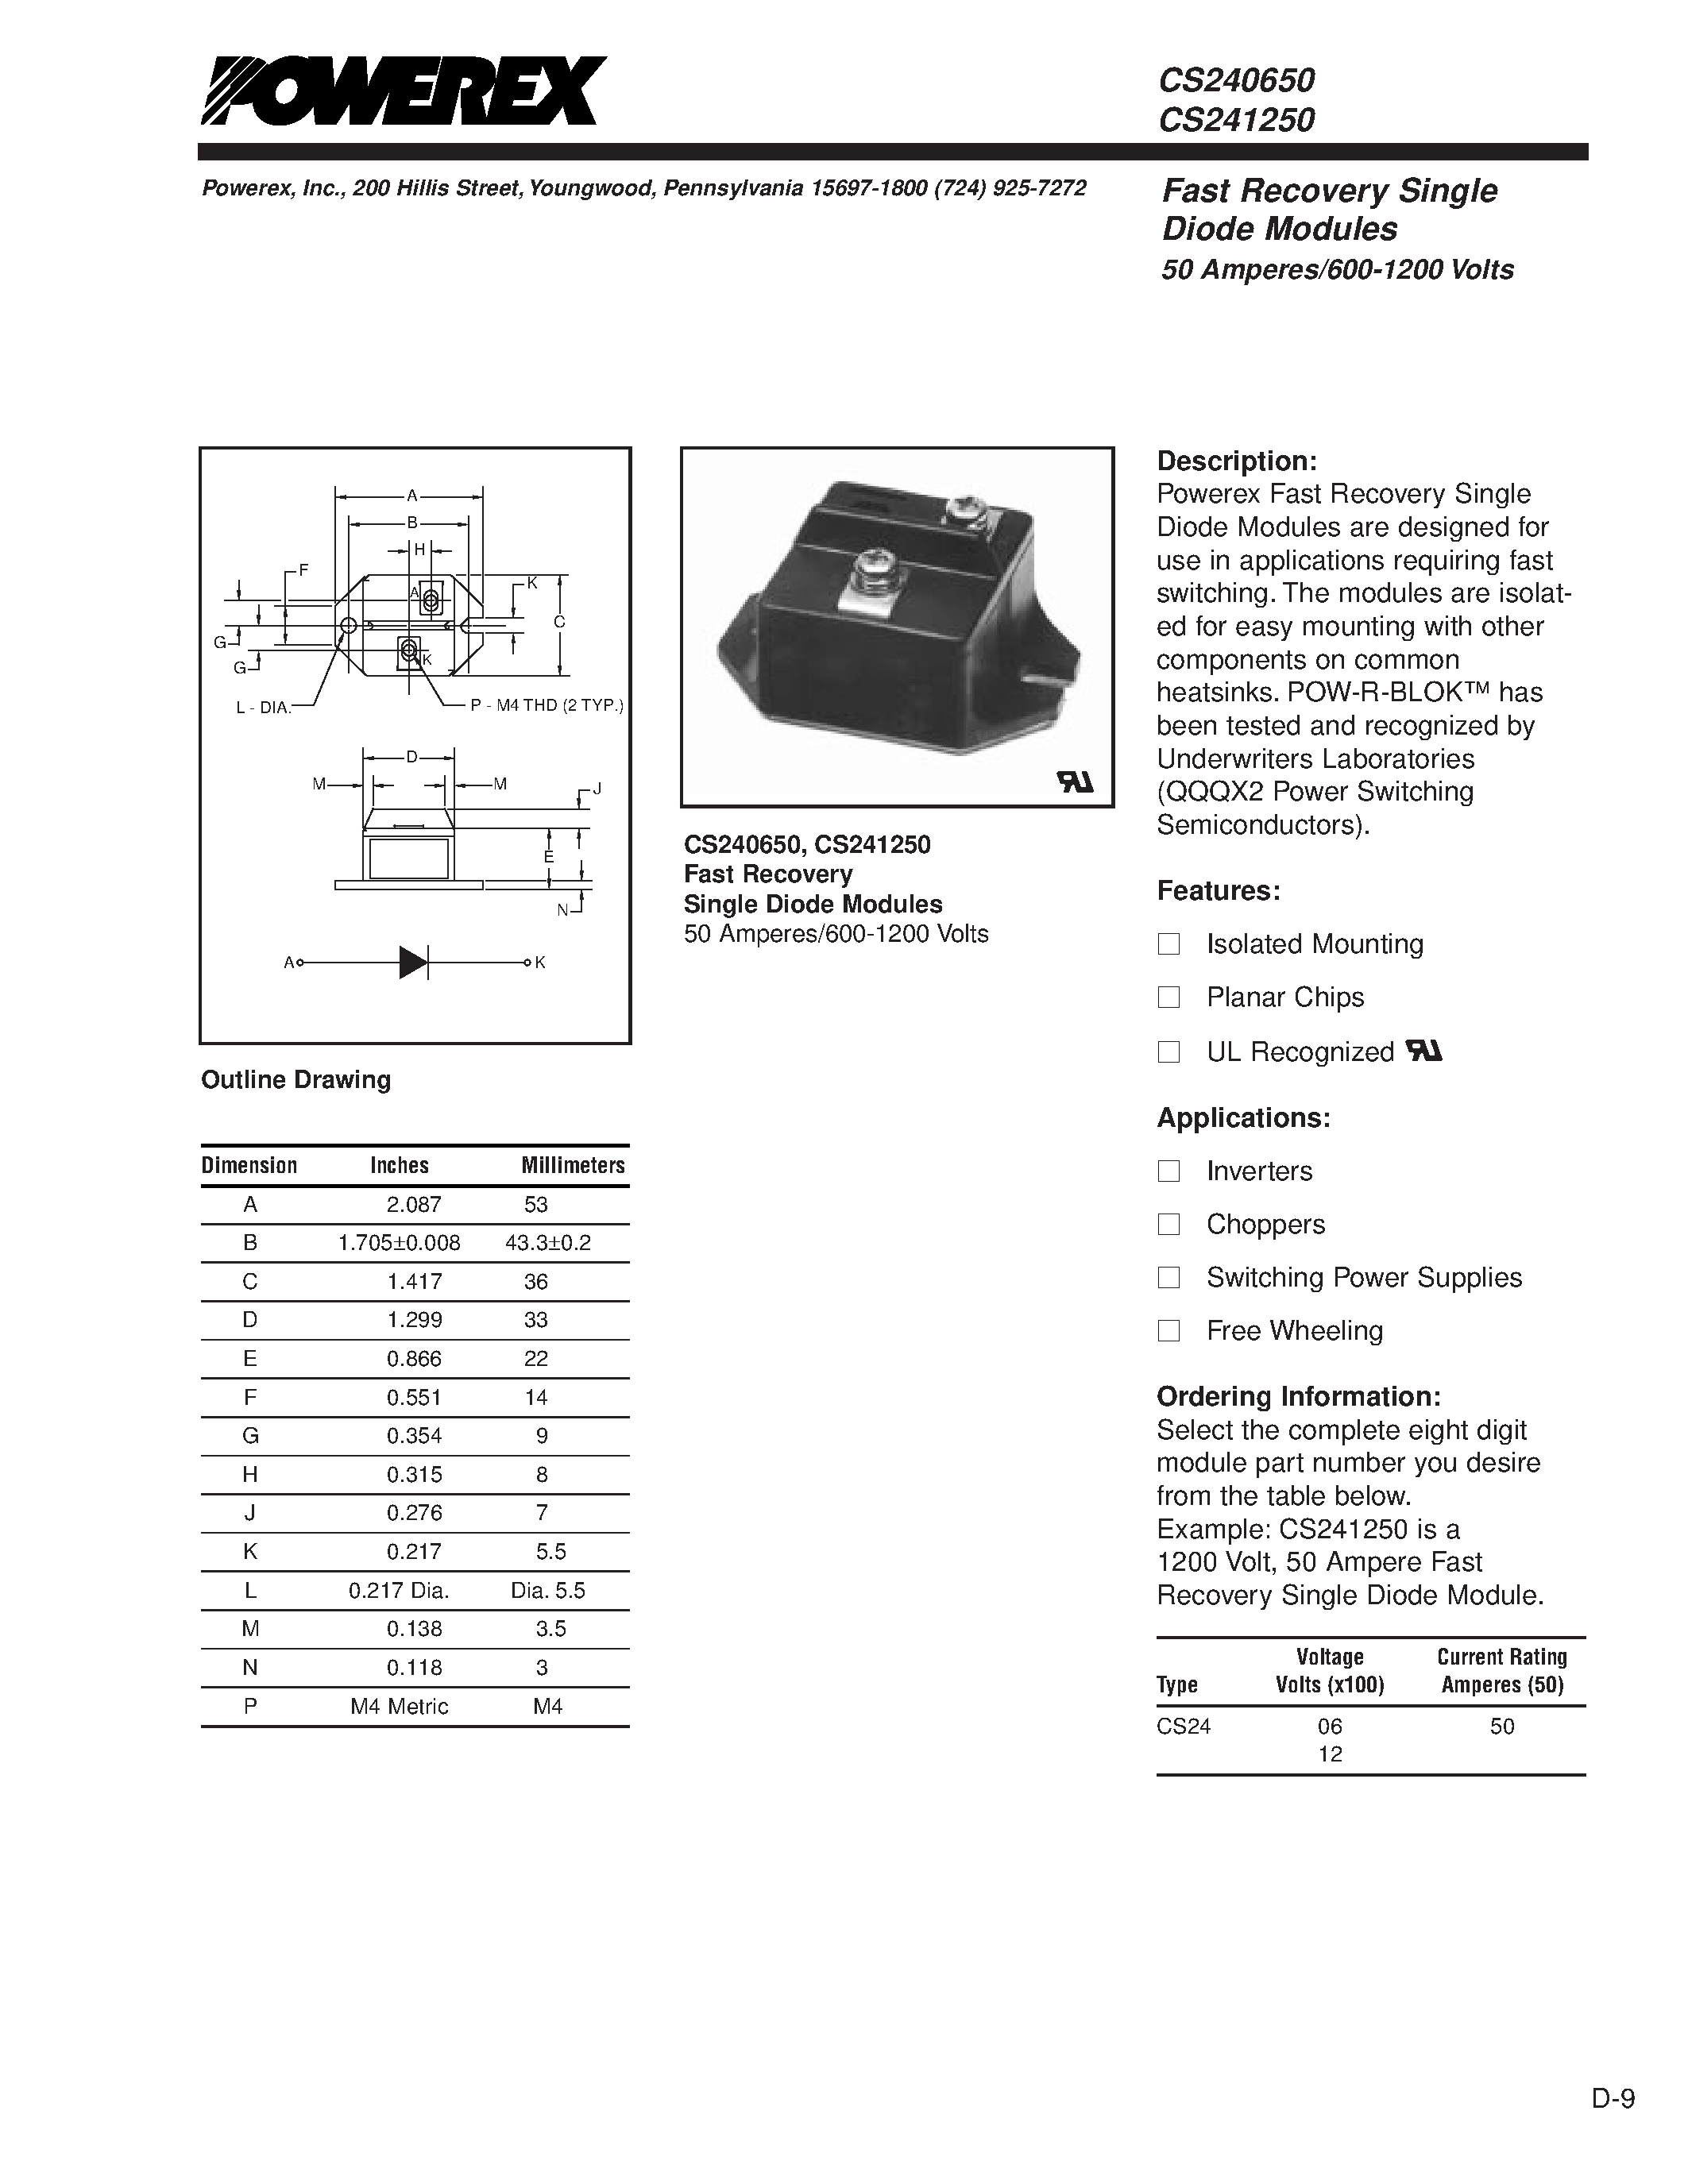 Datasheet CS240650 - Fast Recovery Single Diode Modules 50 Amperes/600-1200 Volts page 1